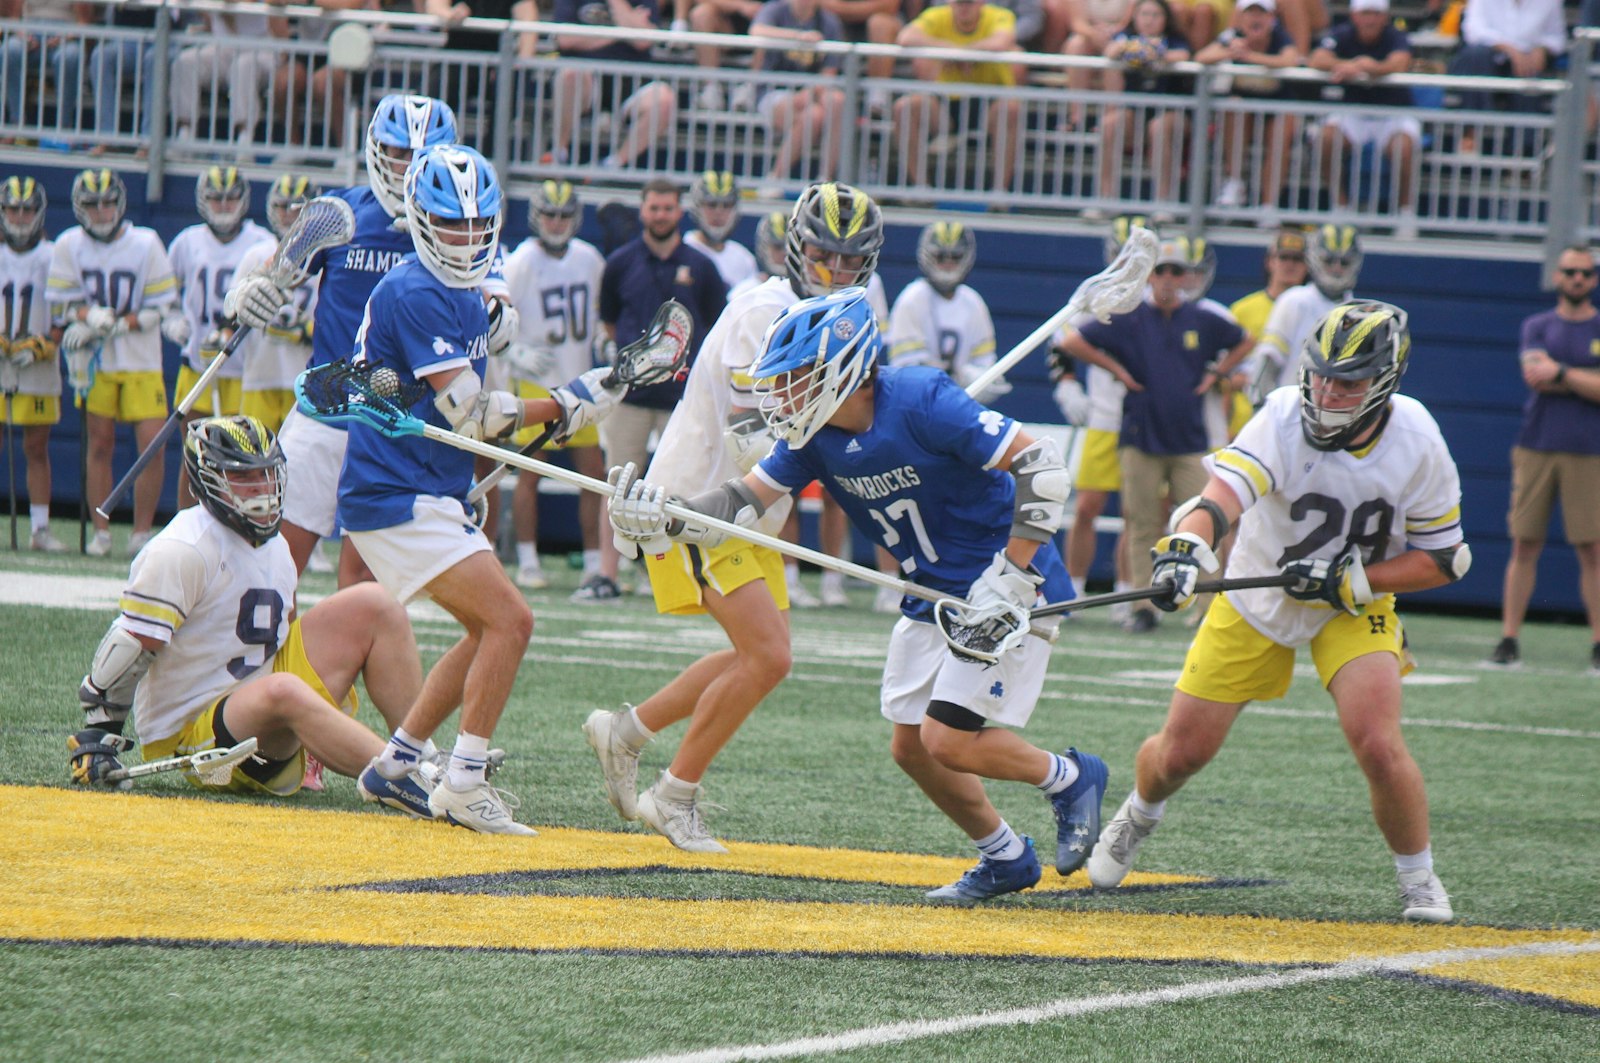 Catholic Central's Joey Ramirez takes the ball on the ground after a midfield skirmish causes a Hartland turnover.